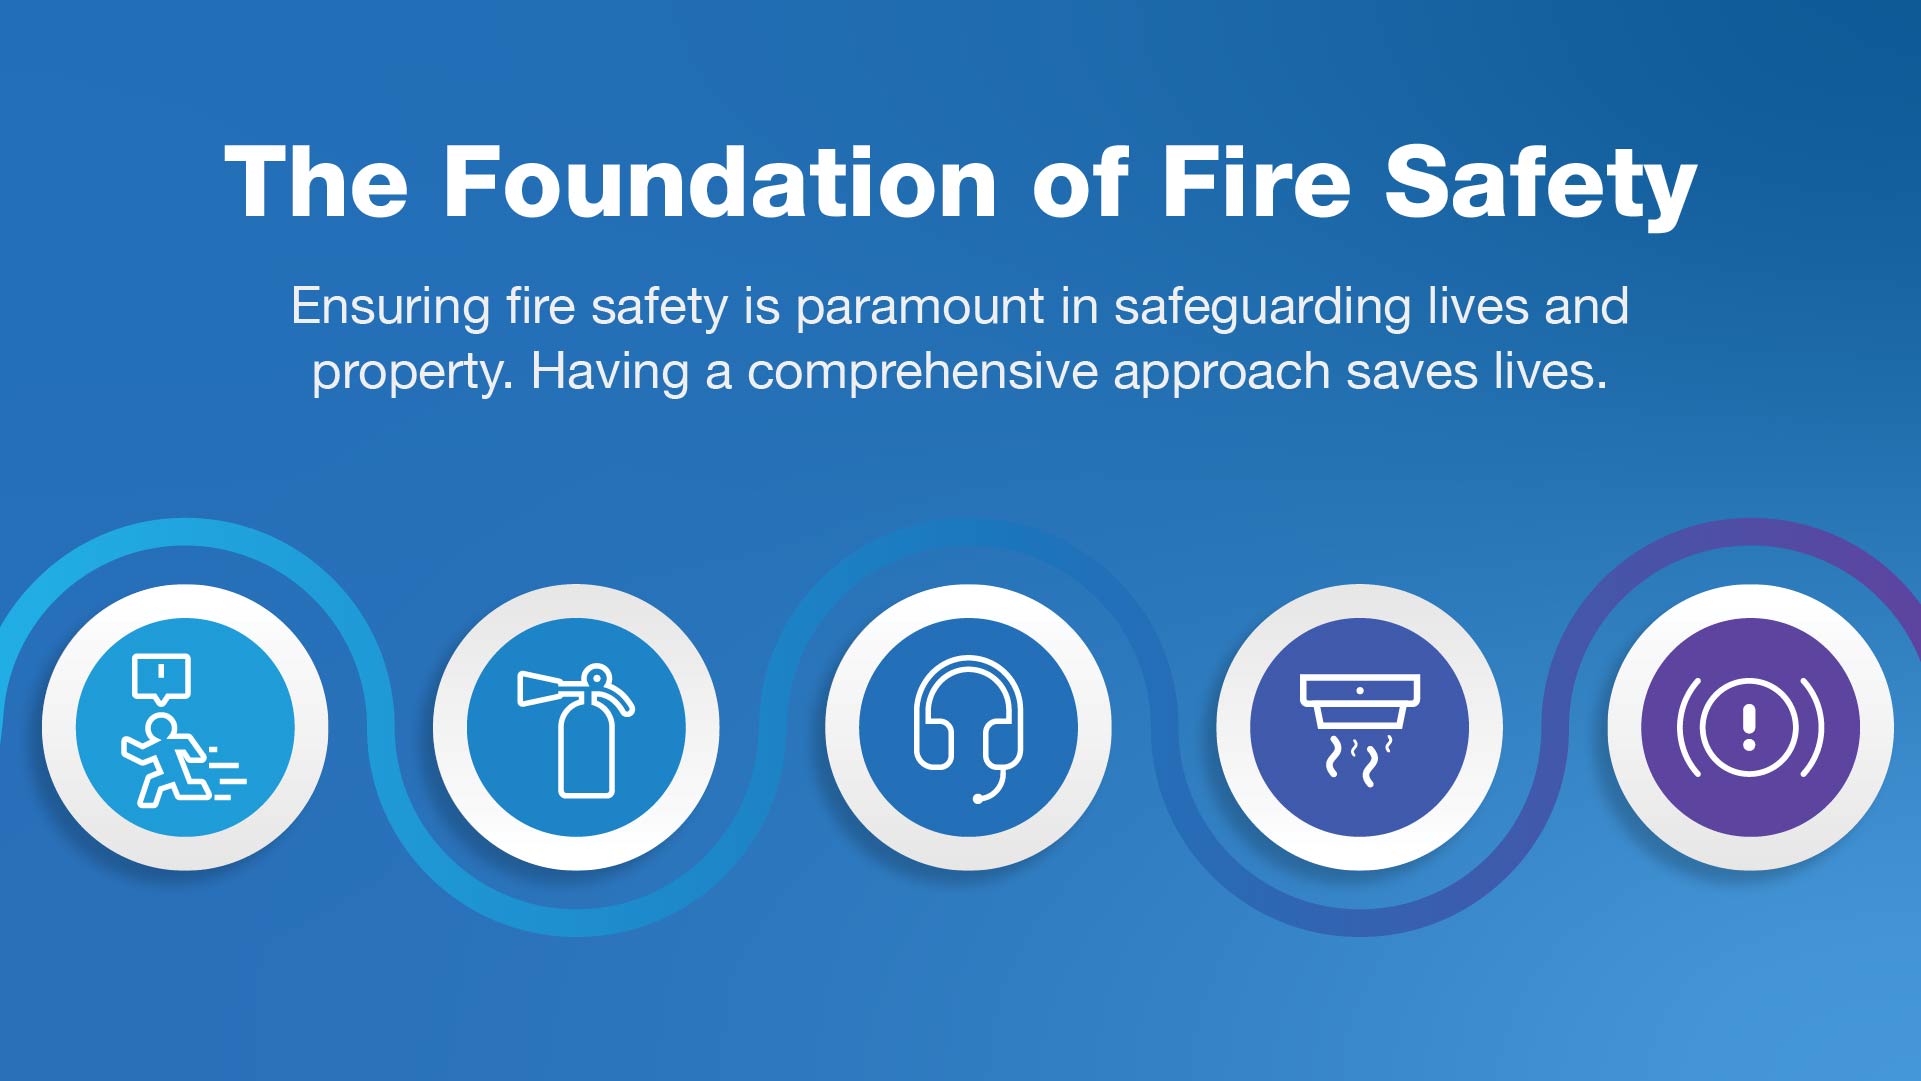 The foundation of fire safety graphic